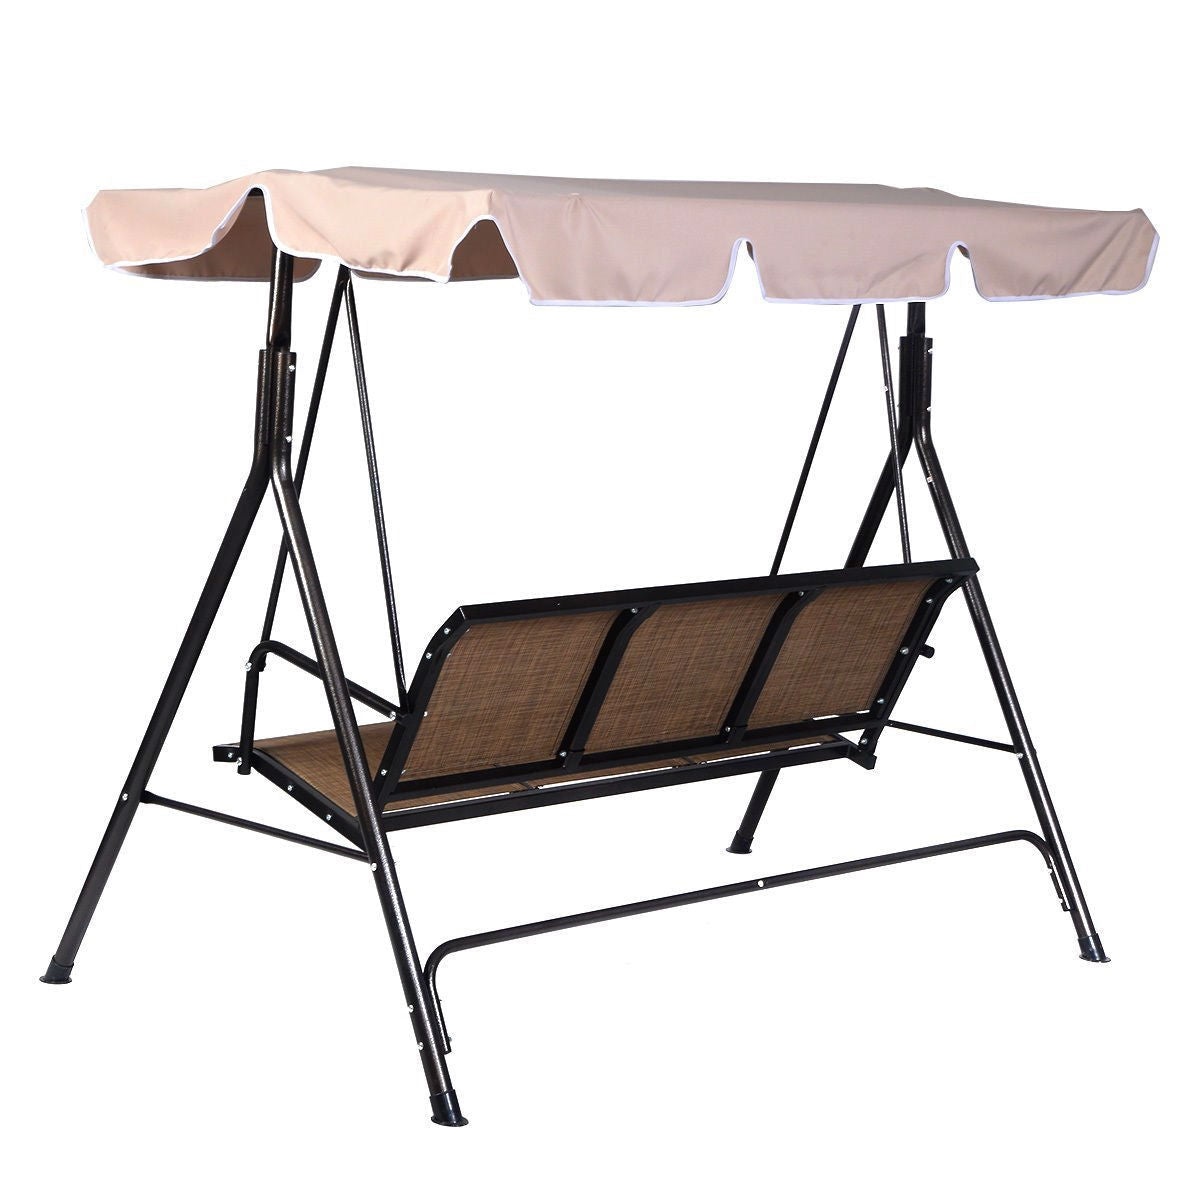 Outdoor > Outdoor Furniture > Porch Swings And Gliders - Outdoor 3-Person Canopy Swing For Porch Patio Or Deck